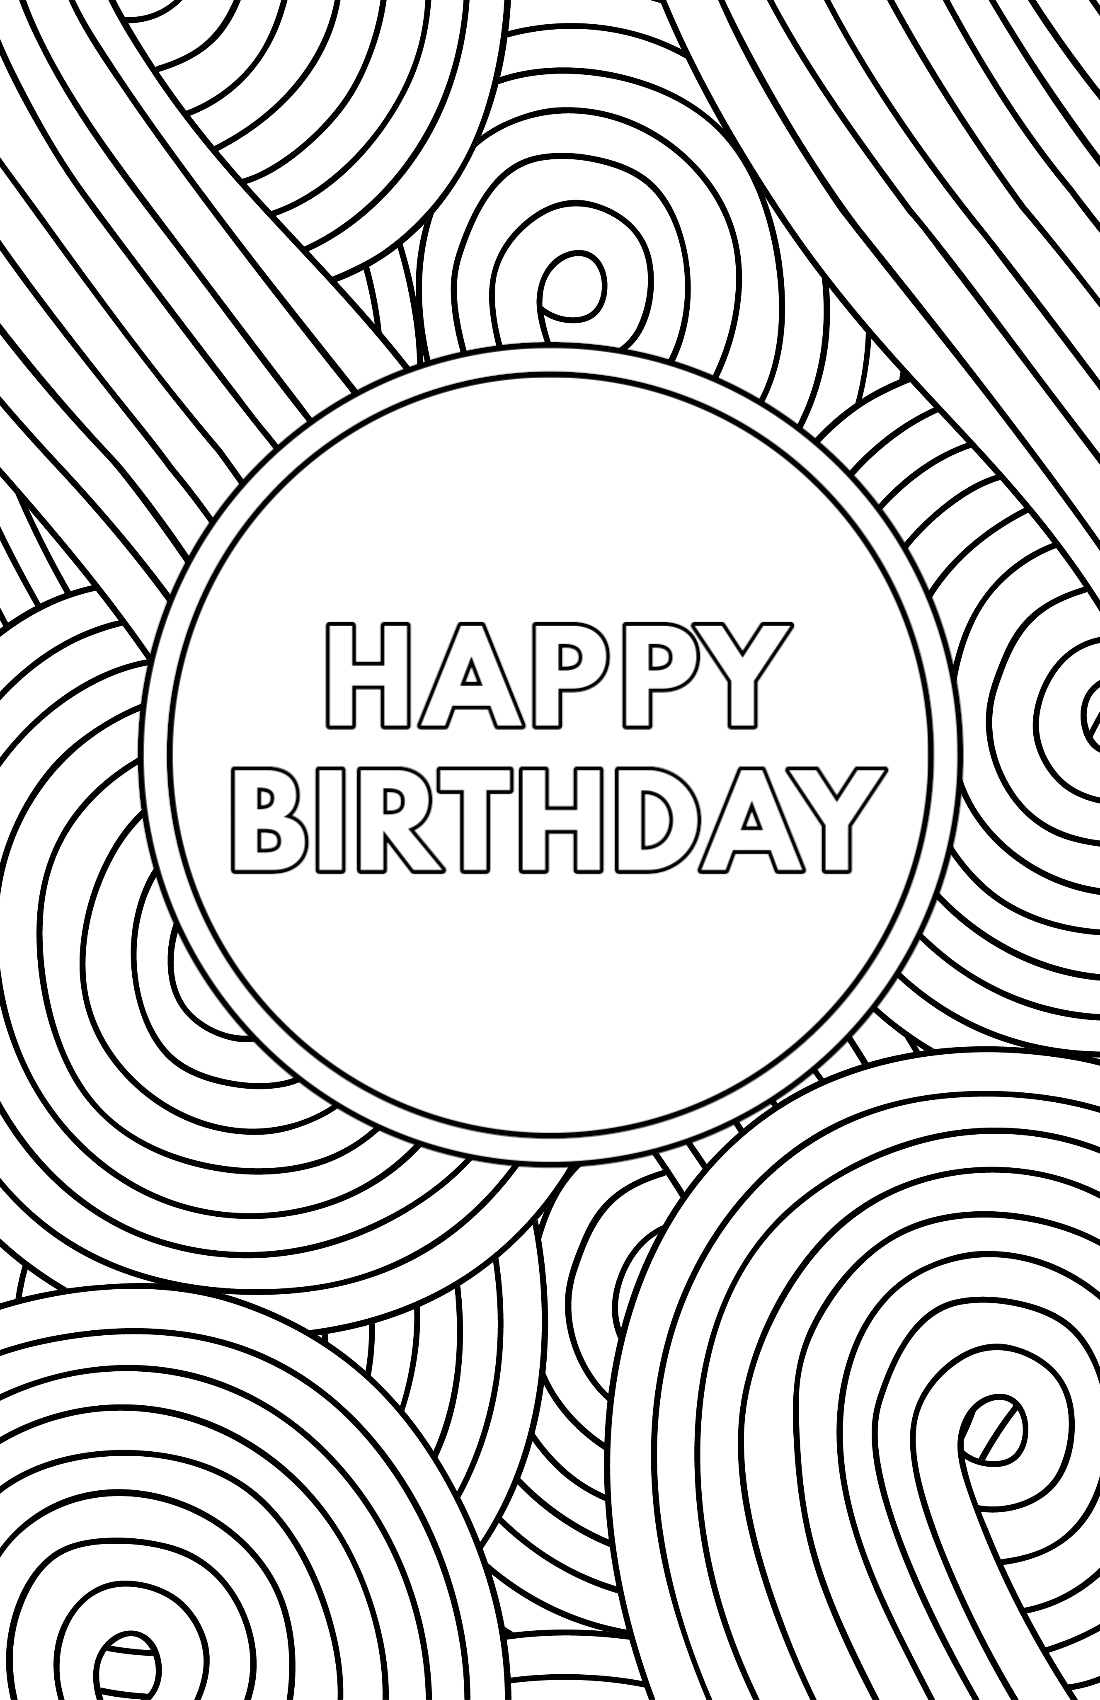 Free Coloring Printable Birthday Cards